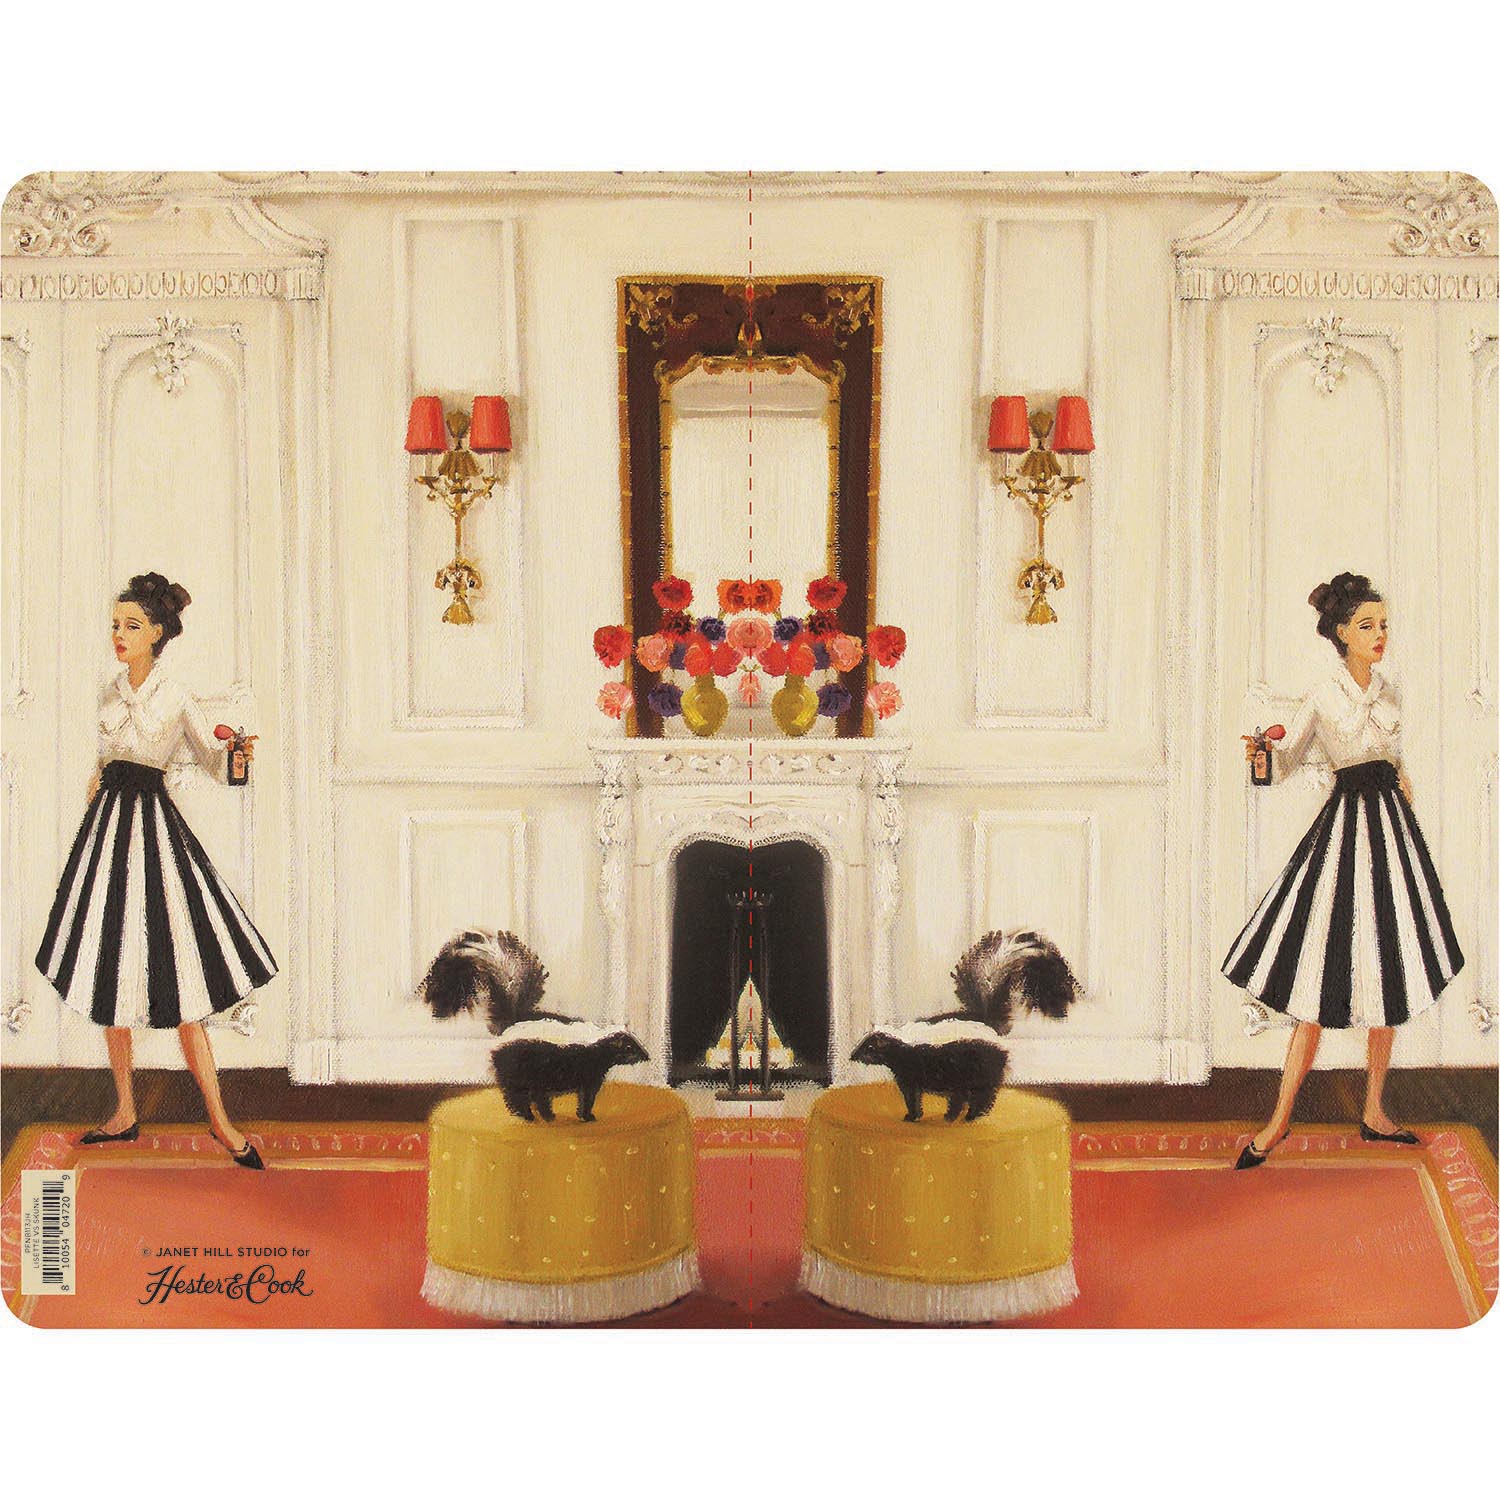 The back and front cover of an open Lisette vs Skunk Notebook, showing the same artwork mirrored on each side.